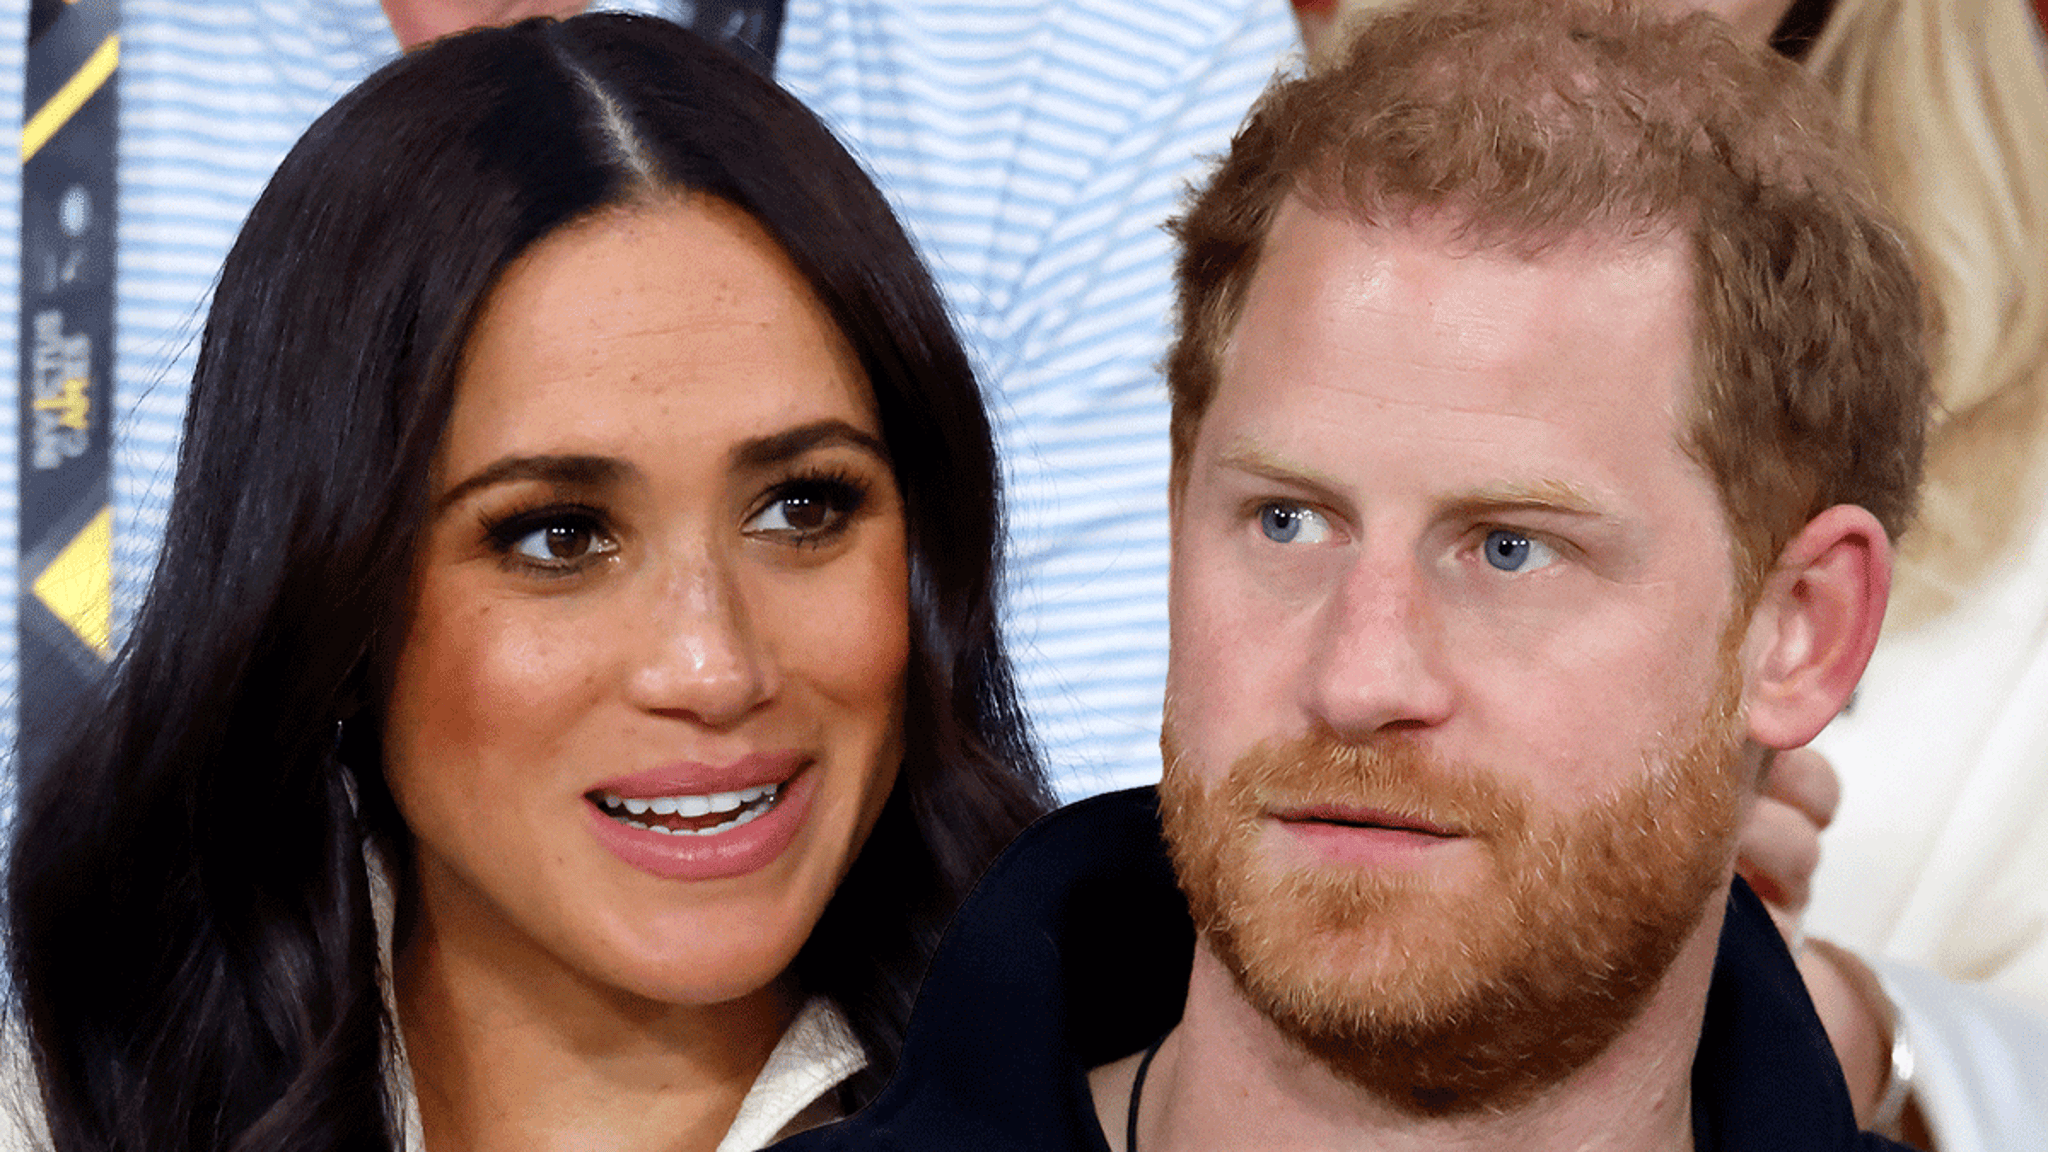 Mansion where Harry and Meghan filmed Netflix Doc allegedly not their home